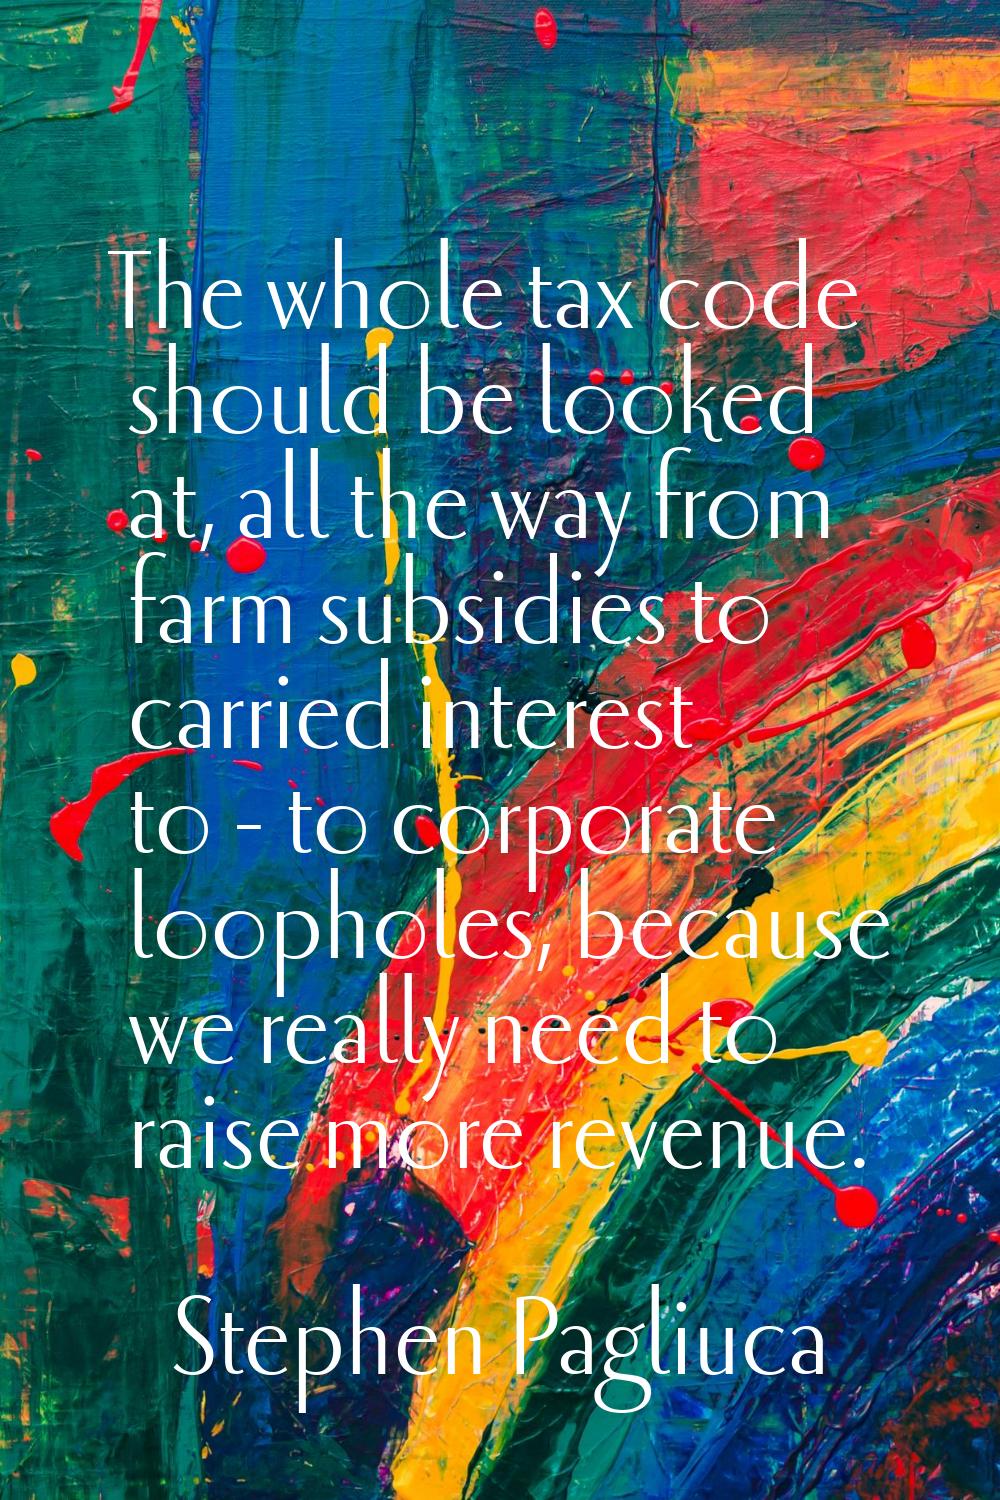 The whole tax code should be looked at, all the way from farm subsidies to carried interest to - to